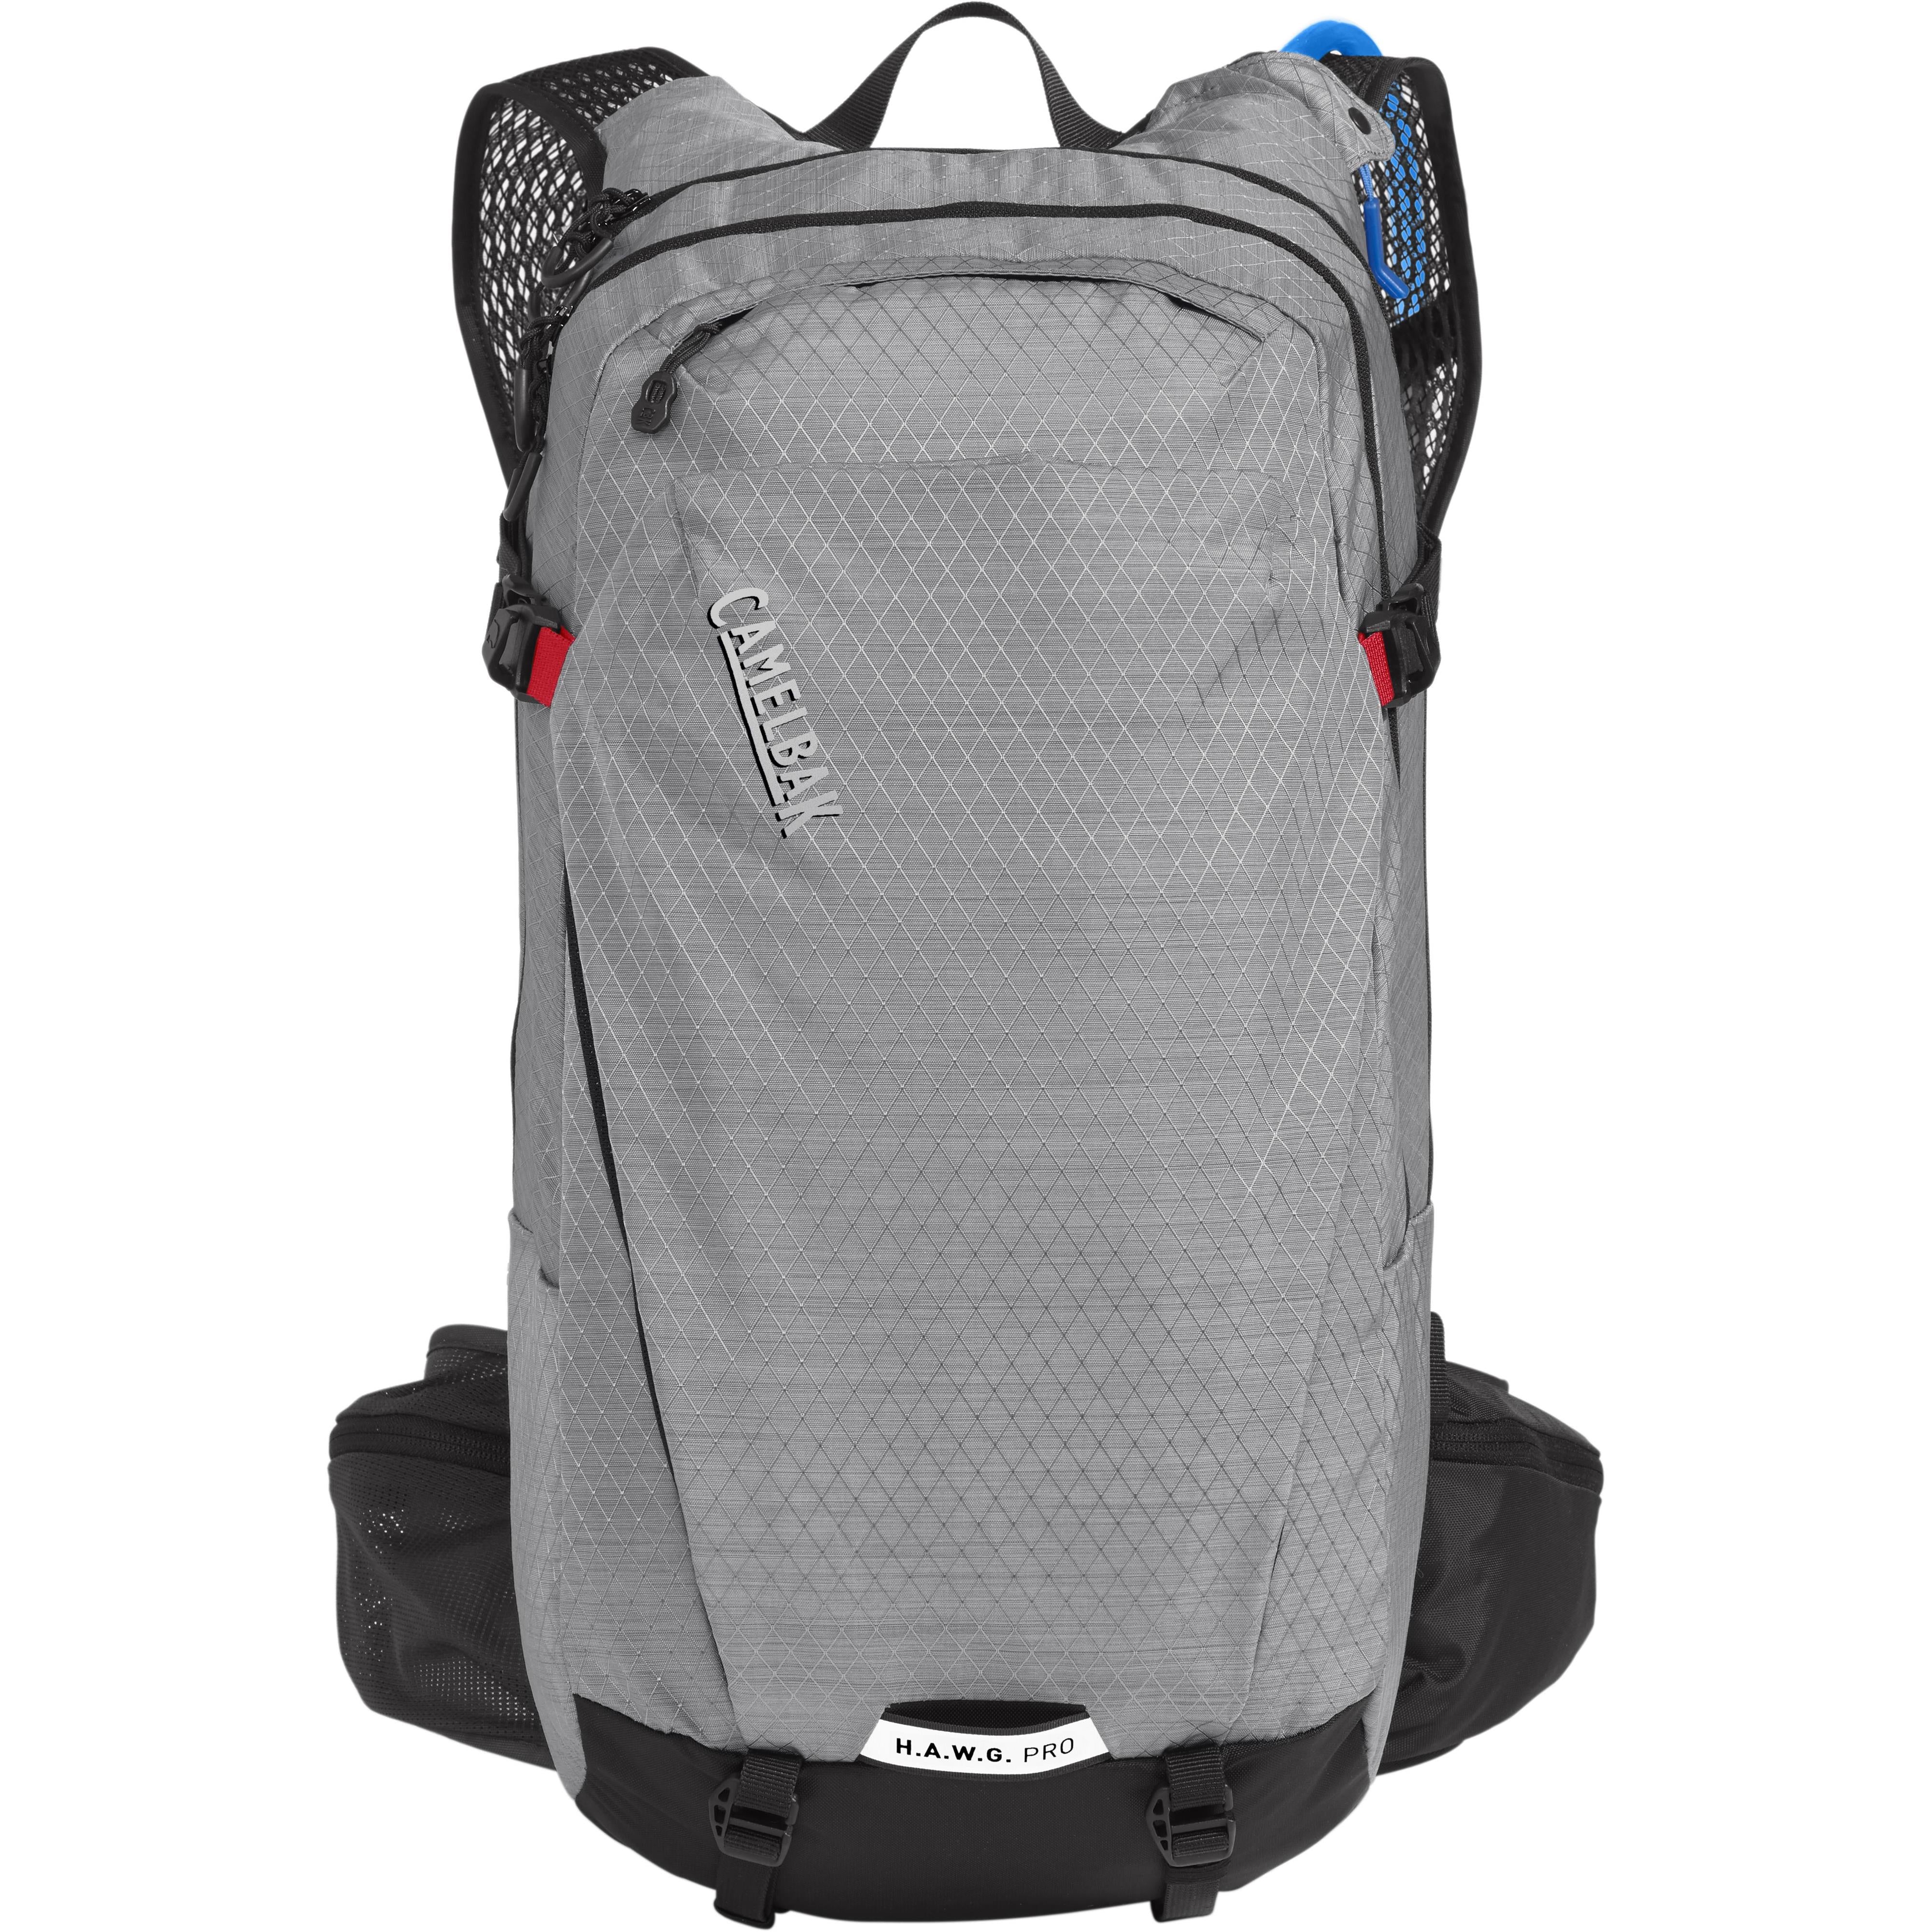 H.A.W.G.® Pro 20 Hydration Pack with 3L Reservoir – CamelBak